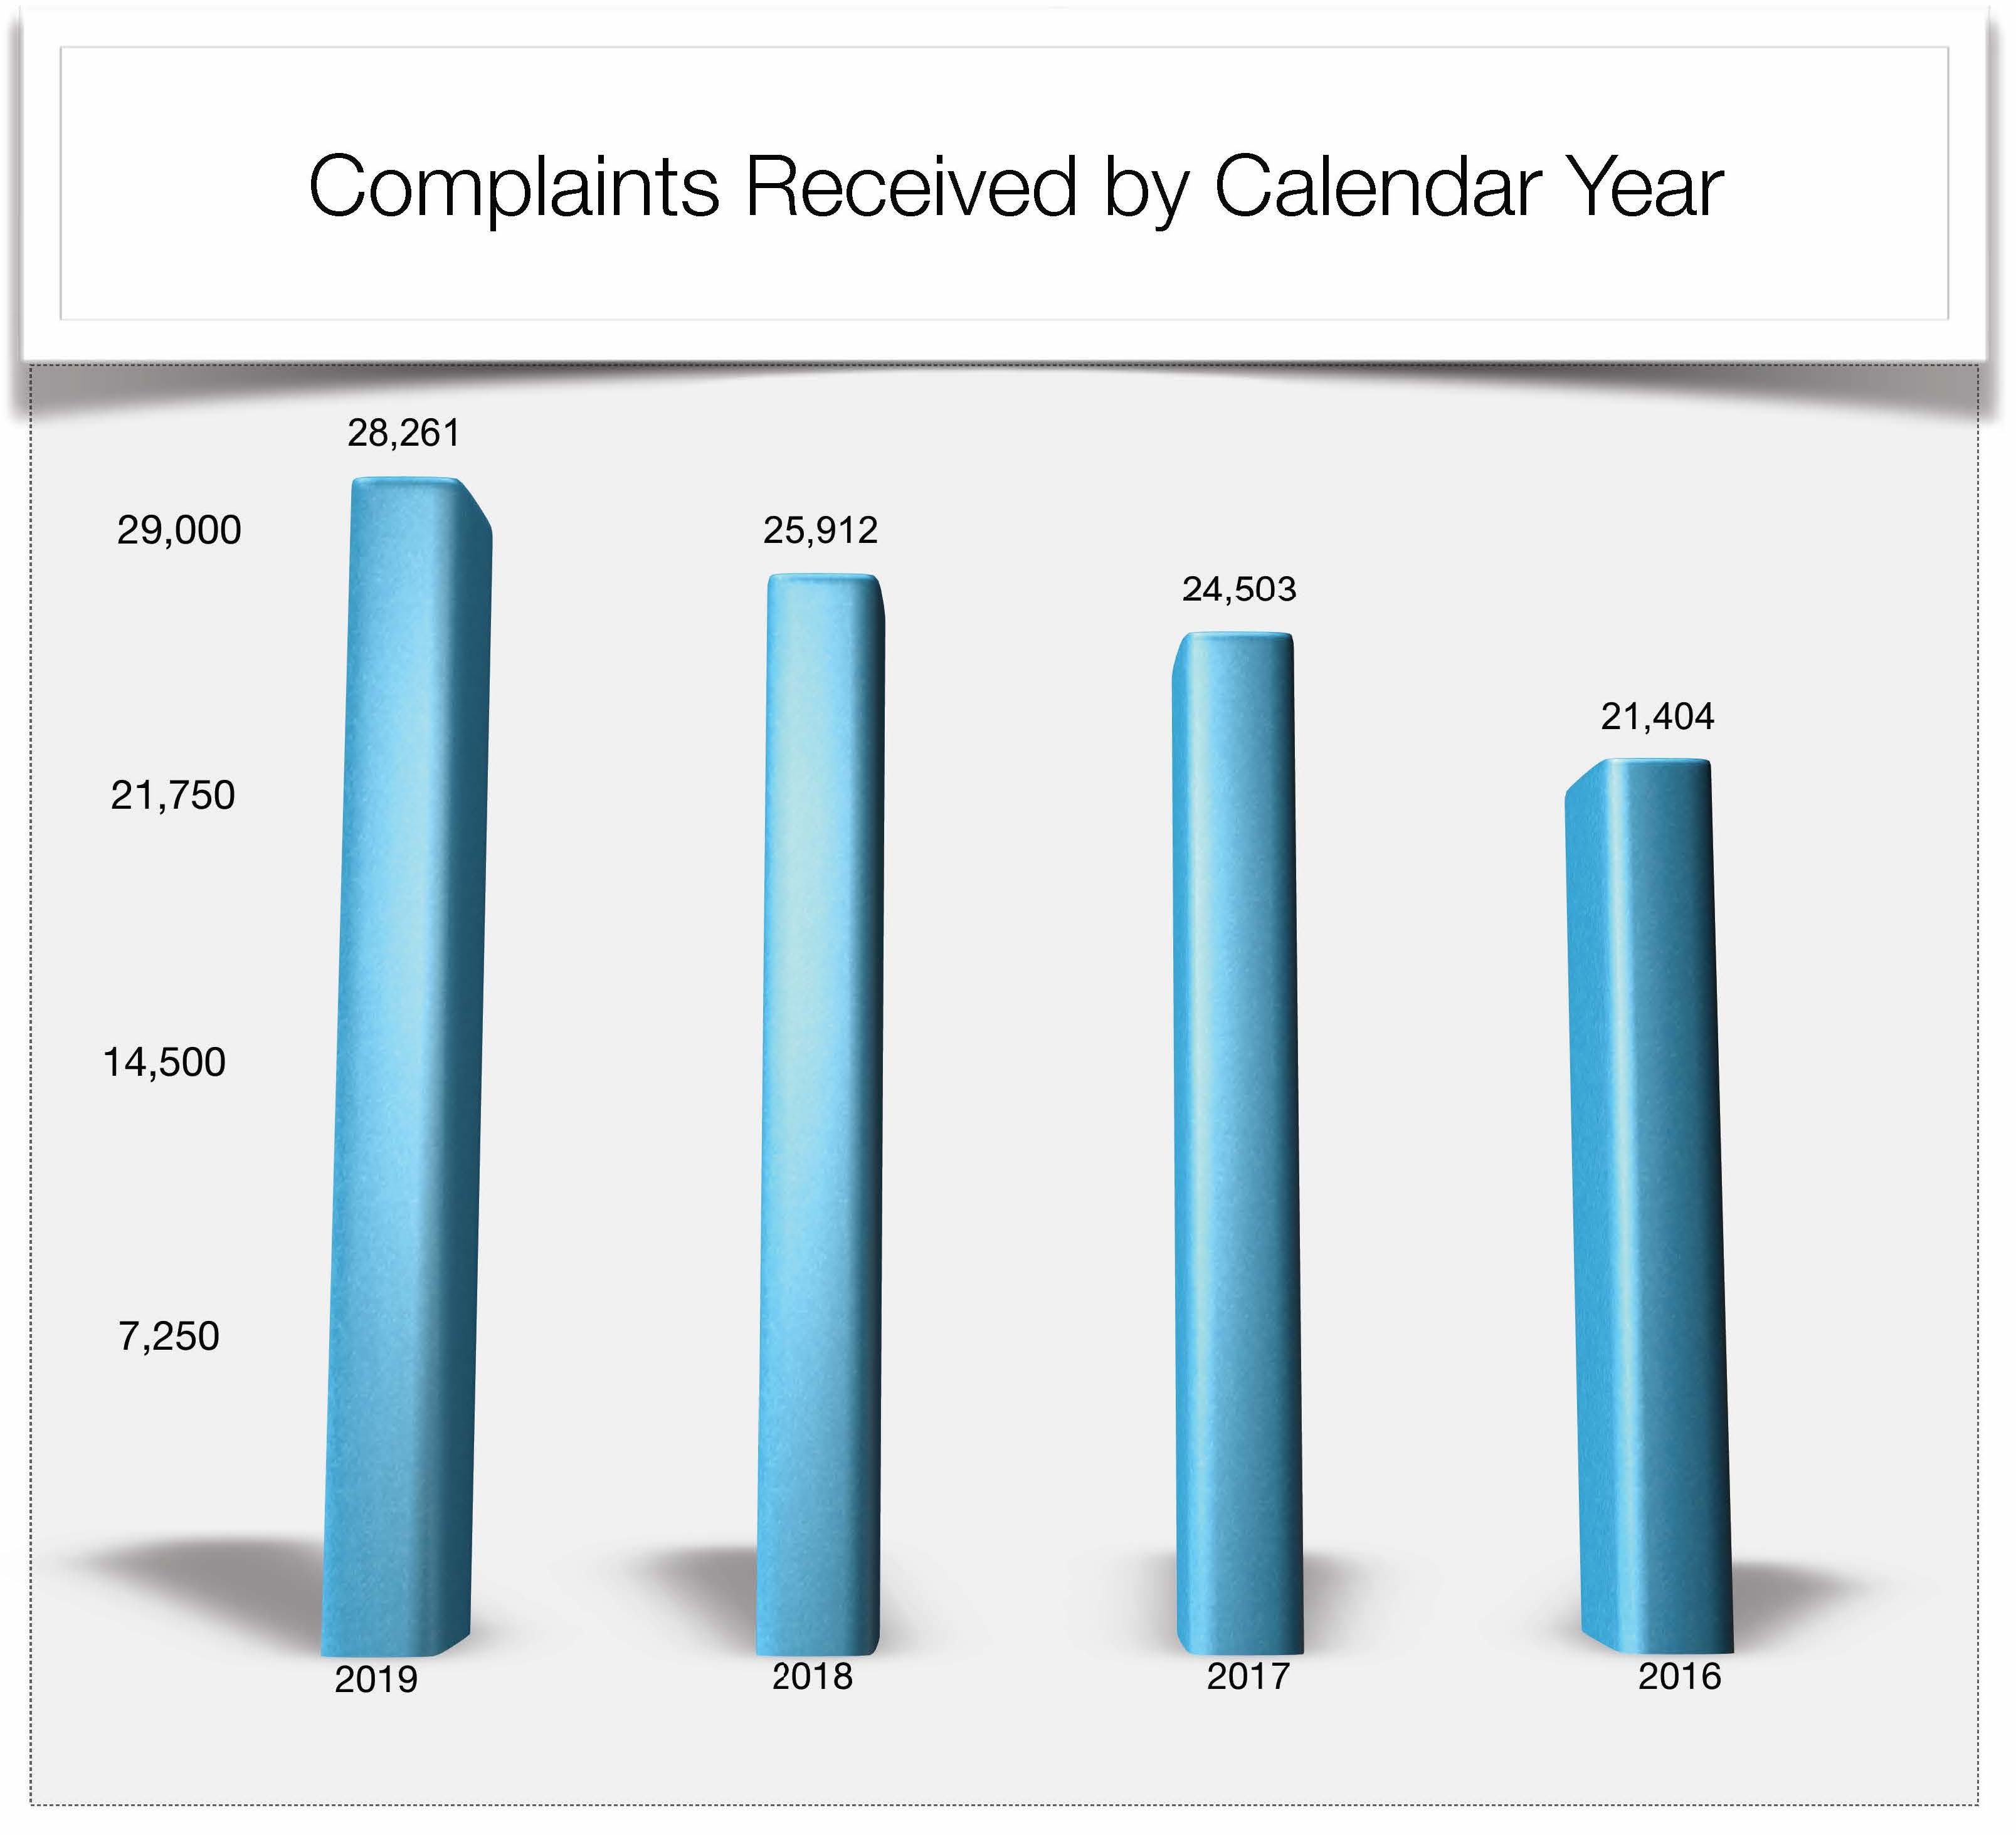 Complaints Received by Calendar Year 2016 - 2019